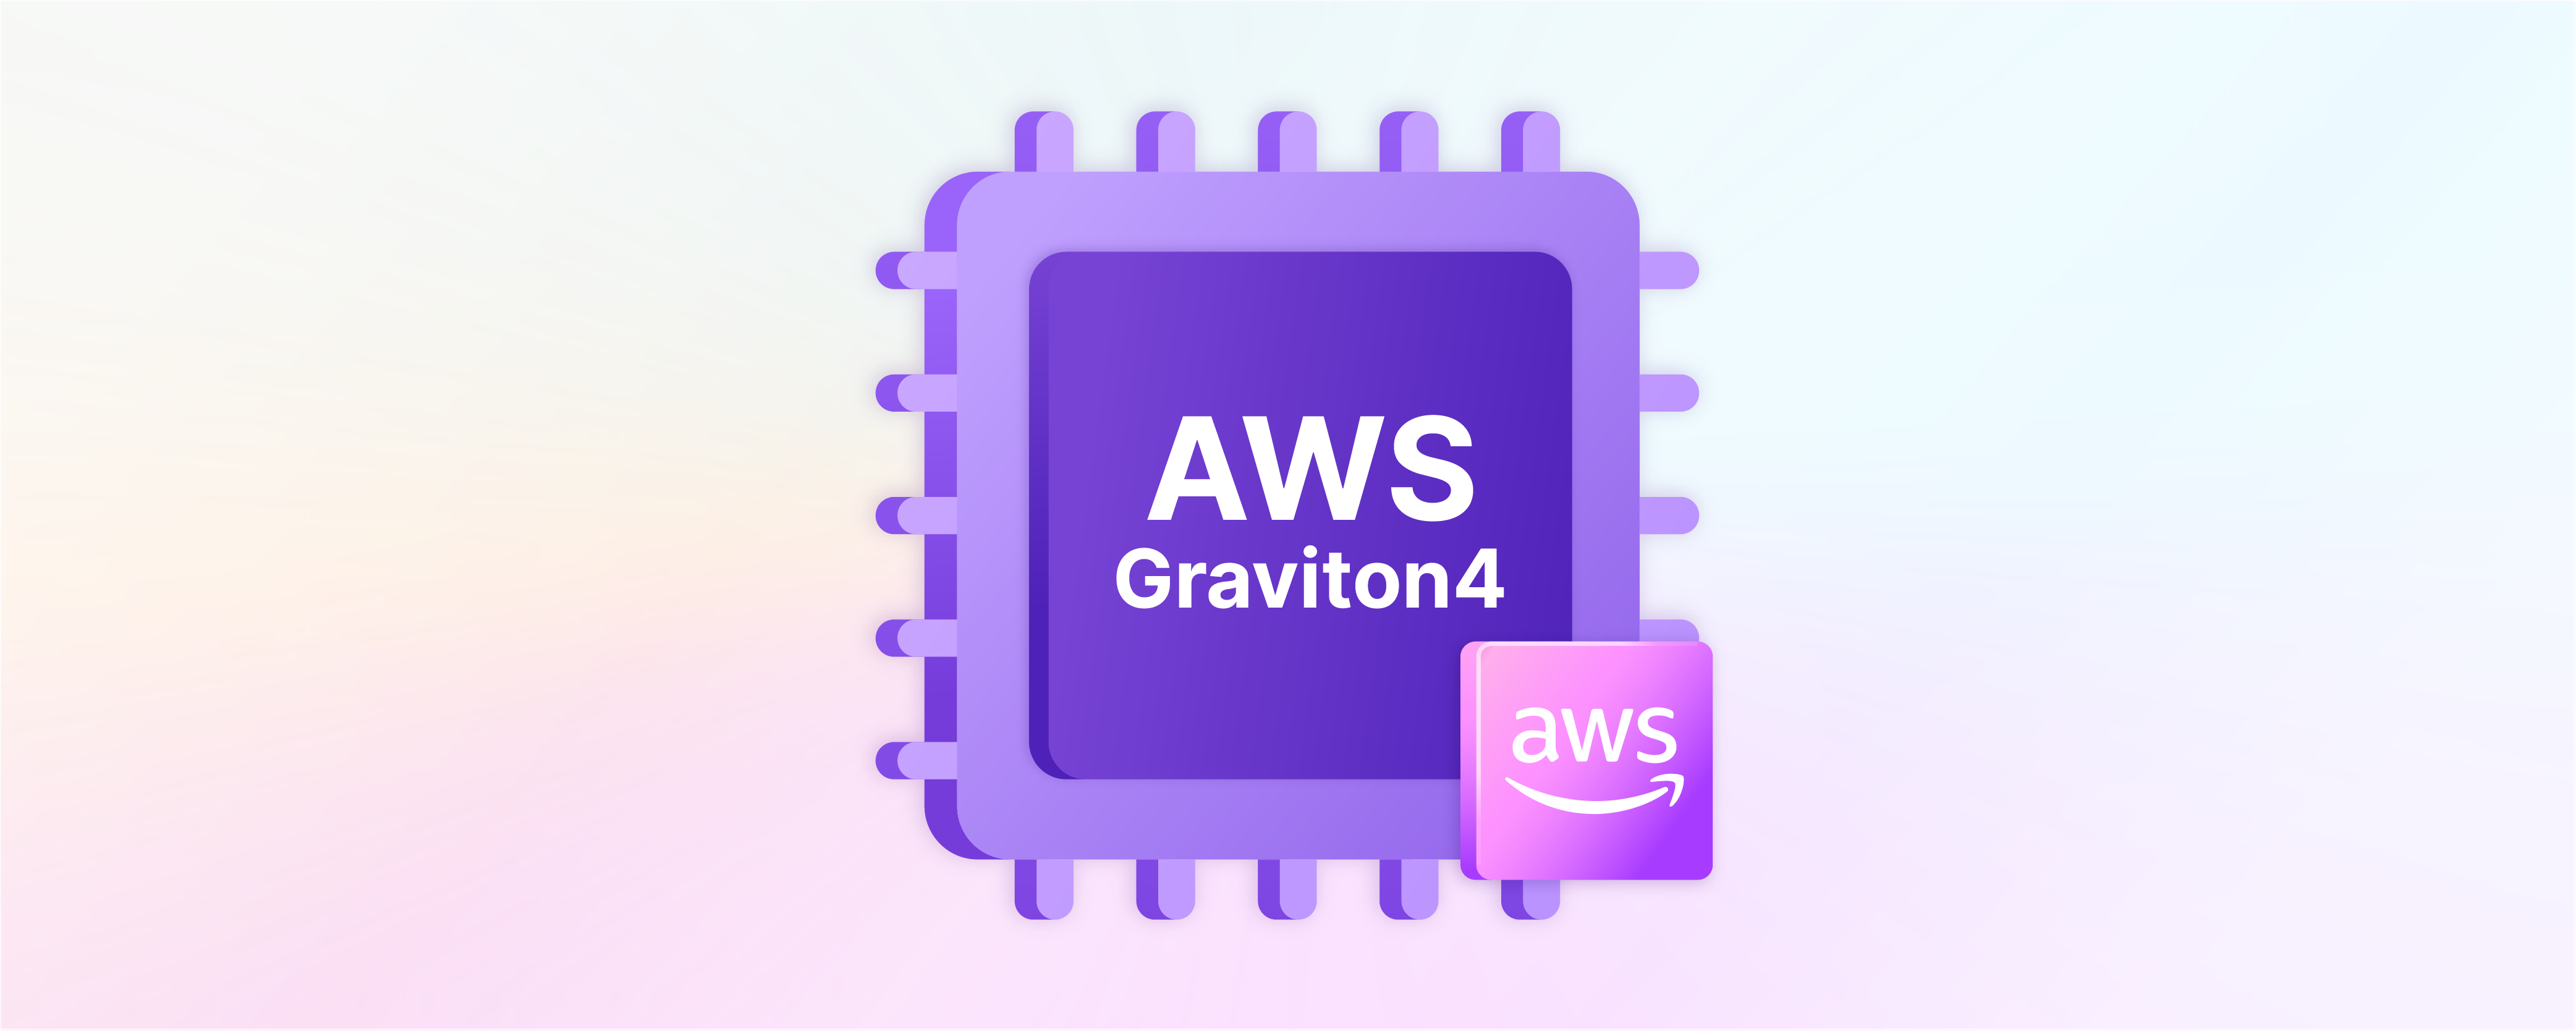 Introducing New Amazon EC2 R8g Instances with AWS Graviton4 Chips!